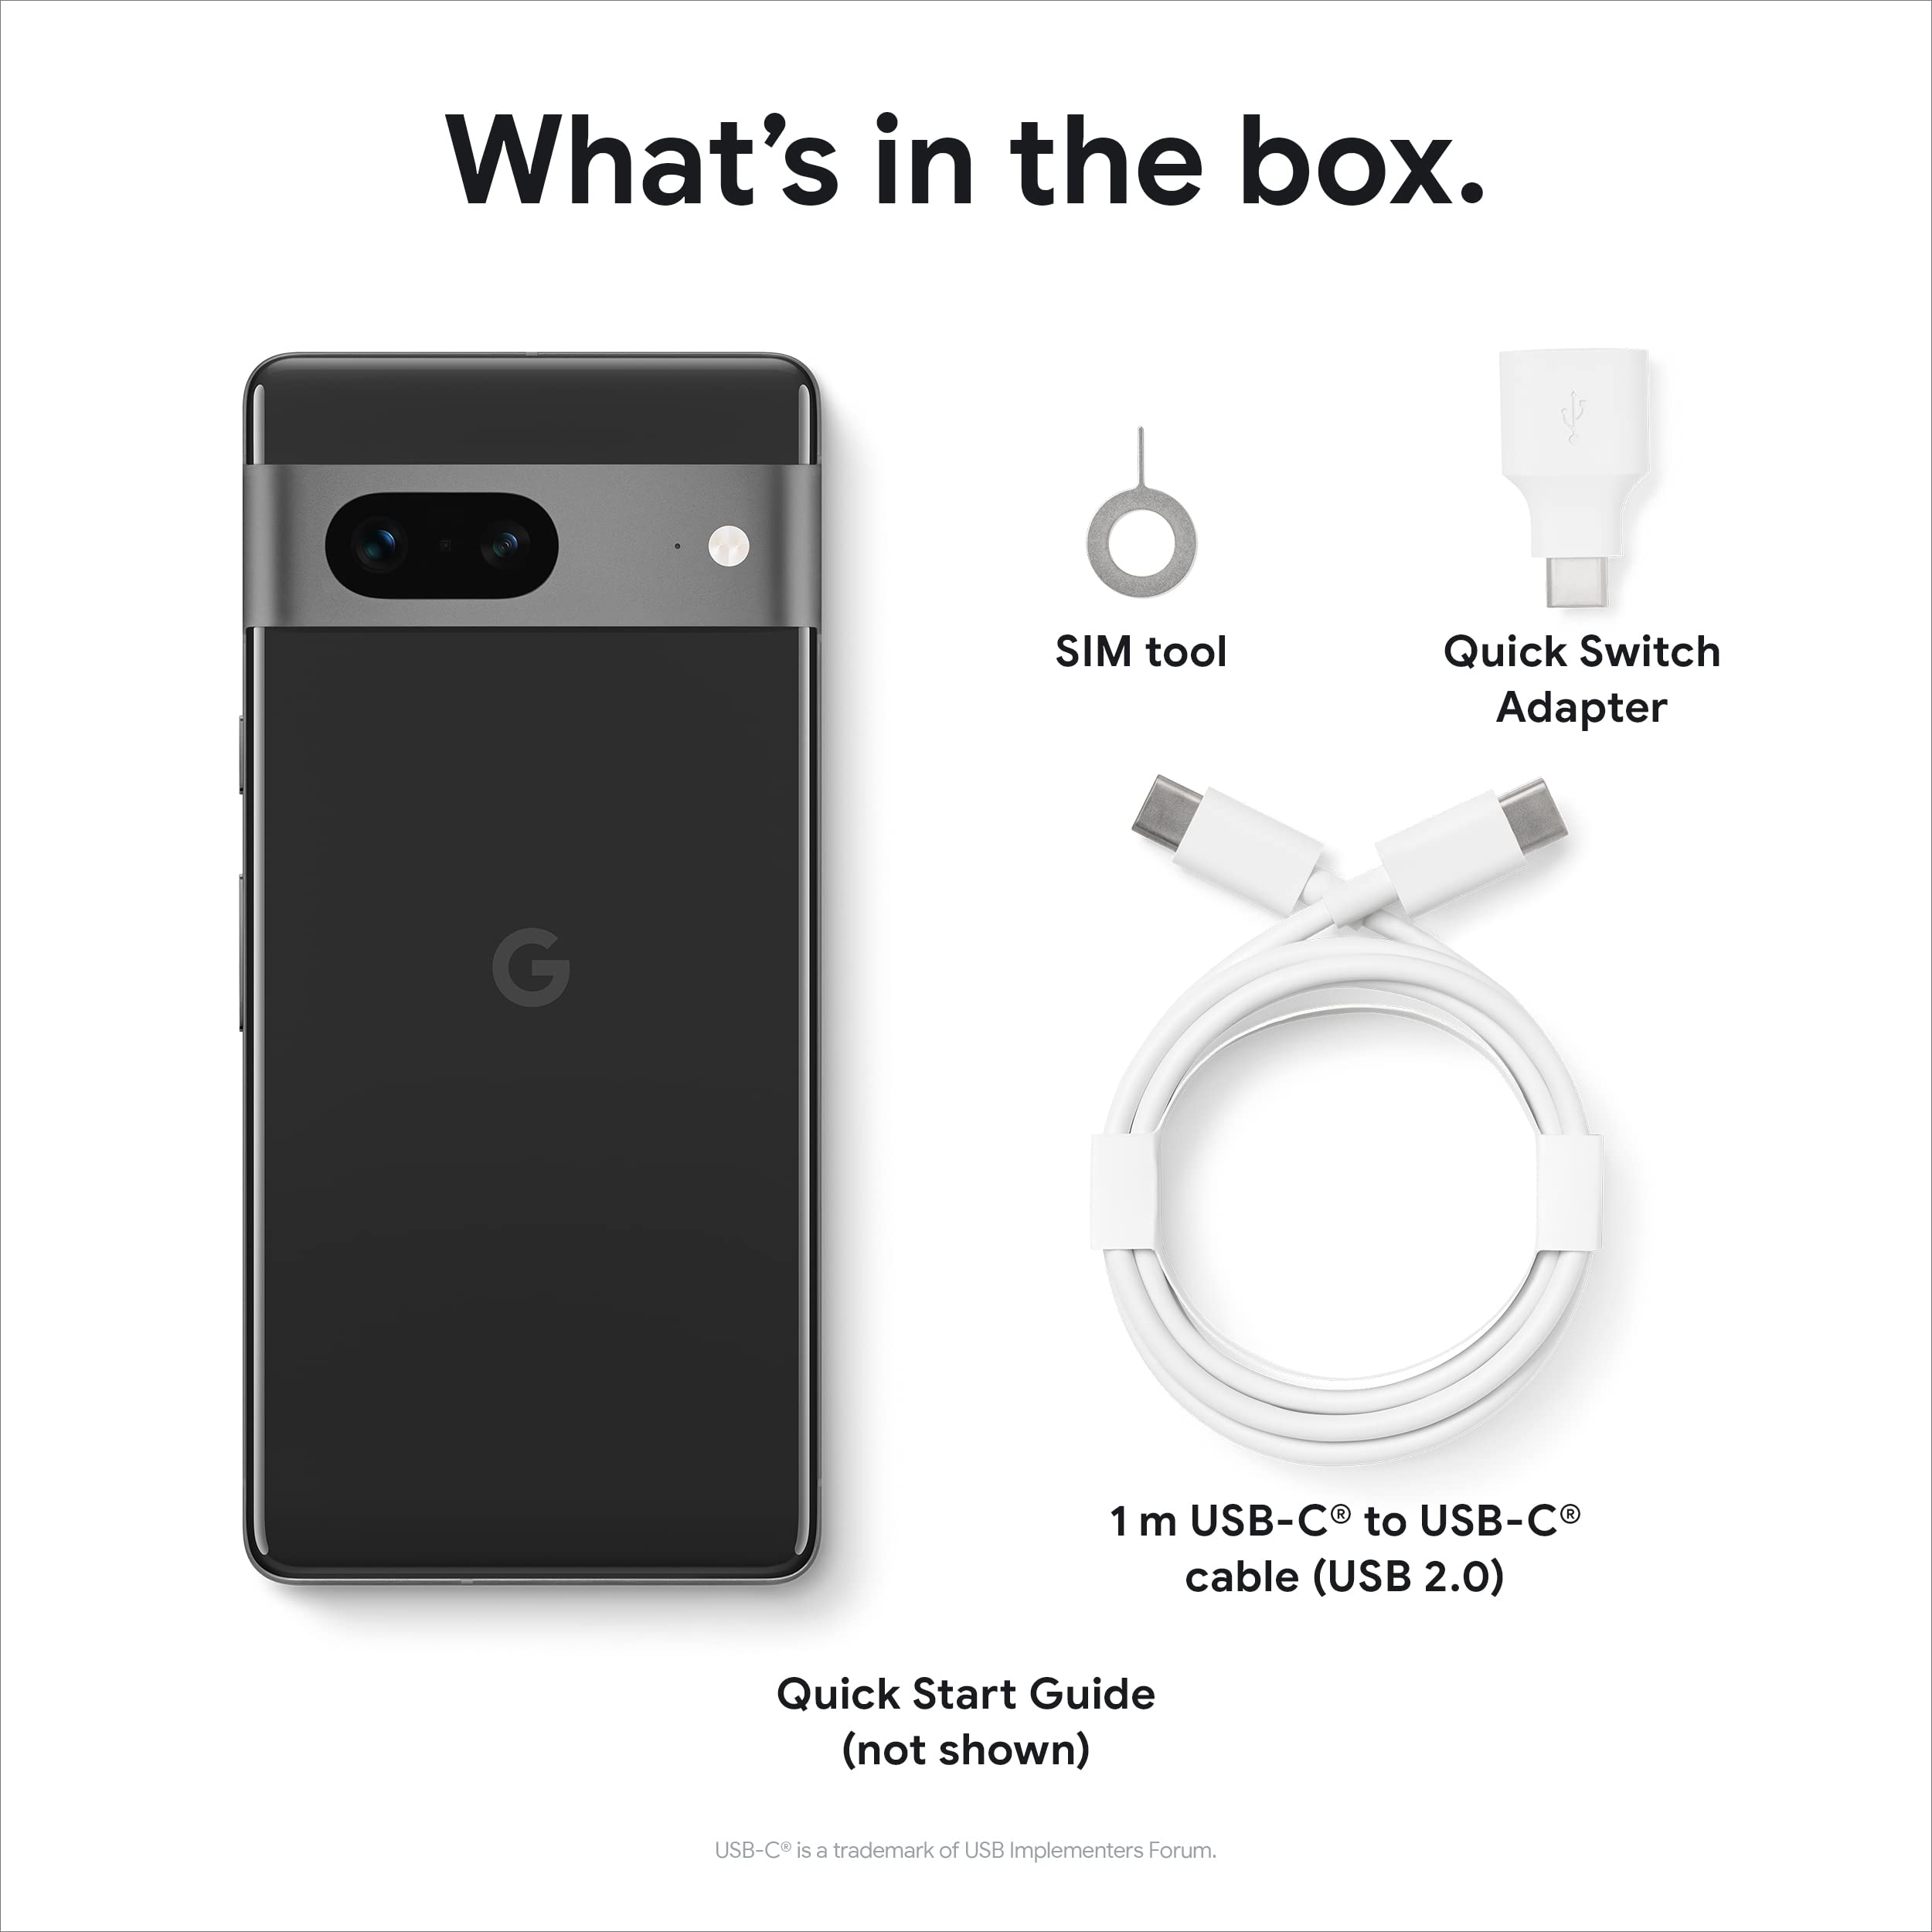 Google Pixel 7-5G Android Phone - Unlocked Smartphone with Wide Angle Lens and 24-Hour Battery - 256GB - Obsidian